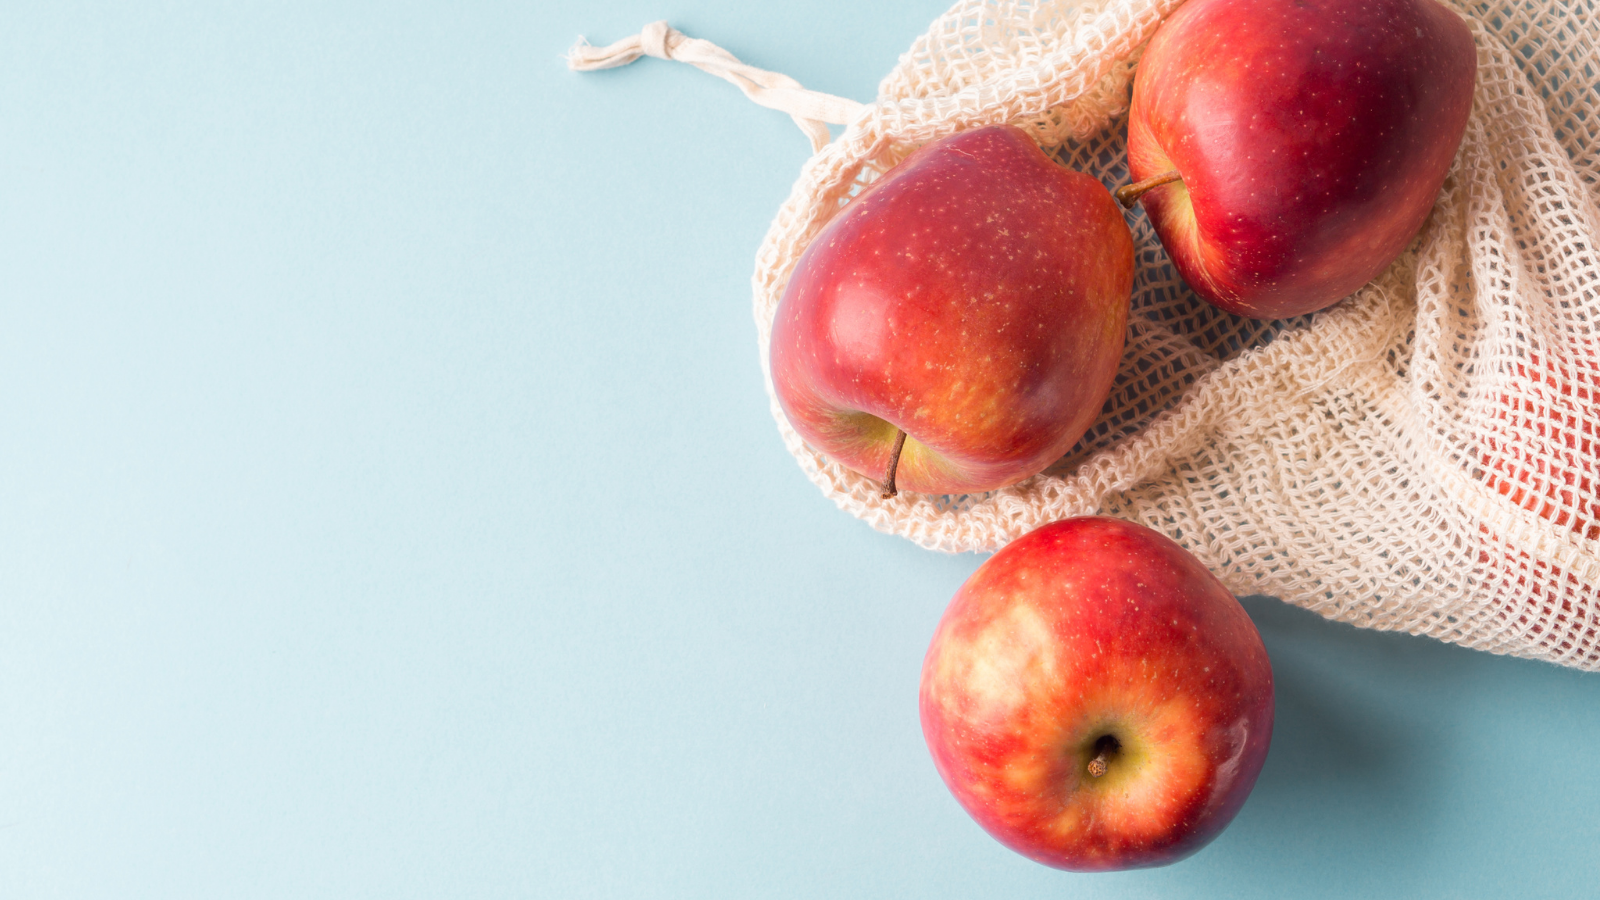 Apples For Baby-Led Weaning